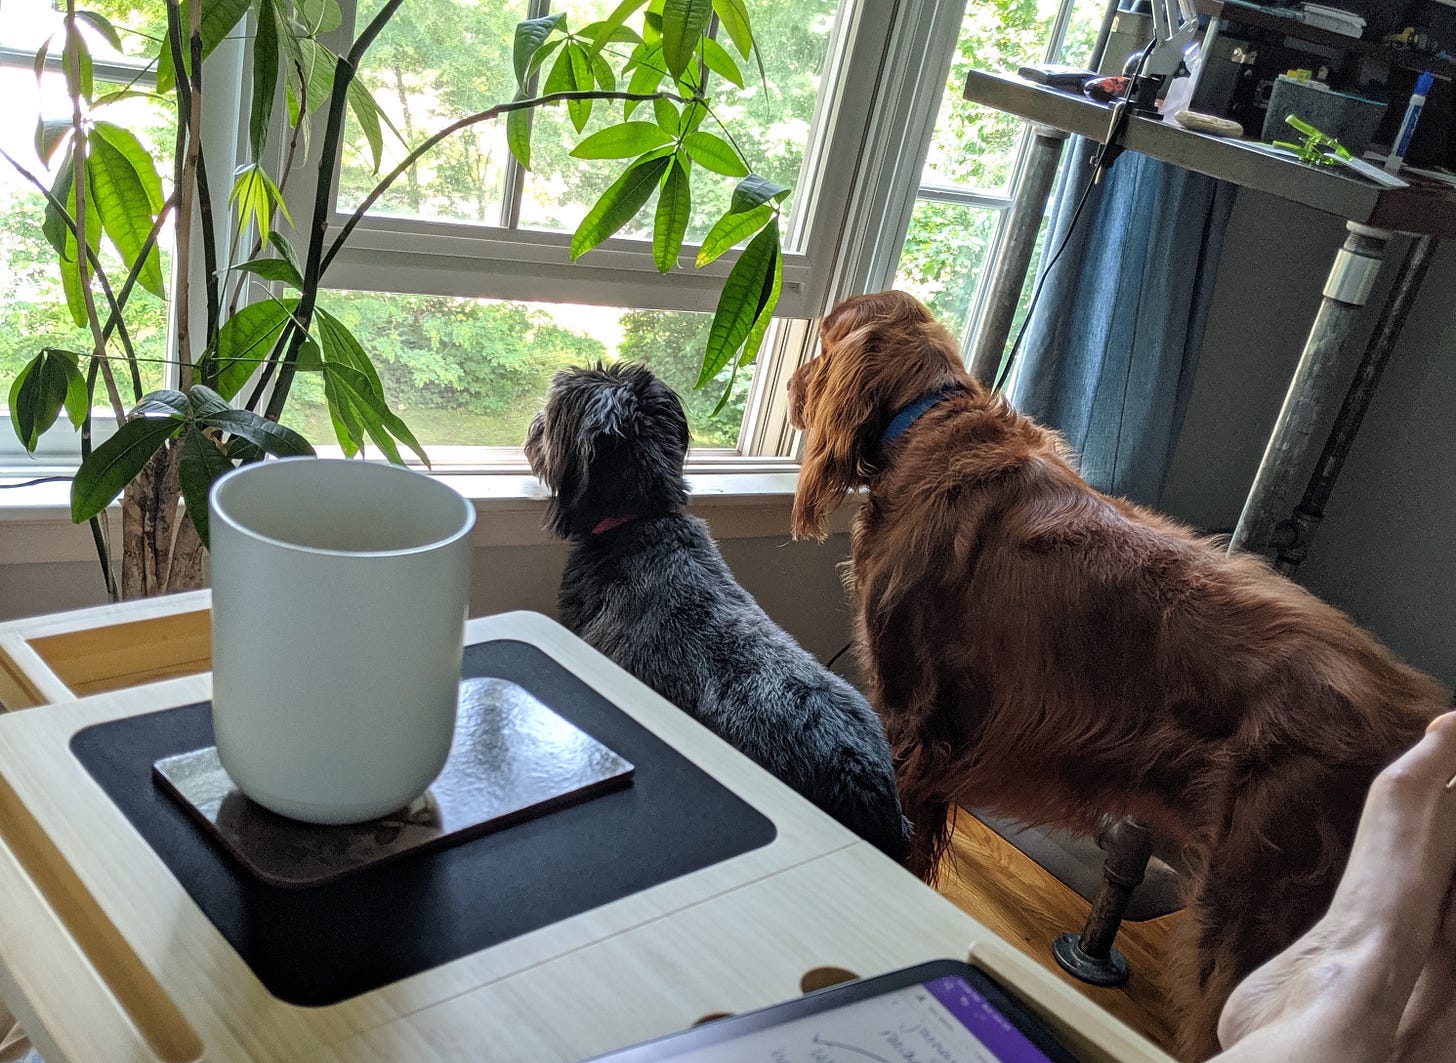 Asimov, an Irish setter, and Leia, a black terrier mutt, stare out Soot's office window while she works